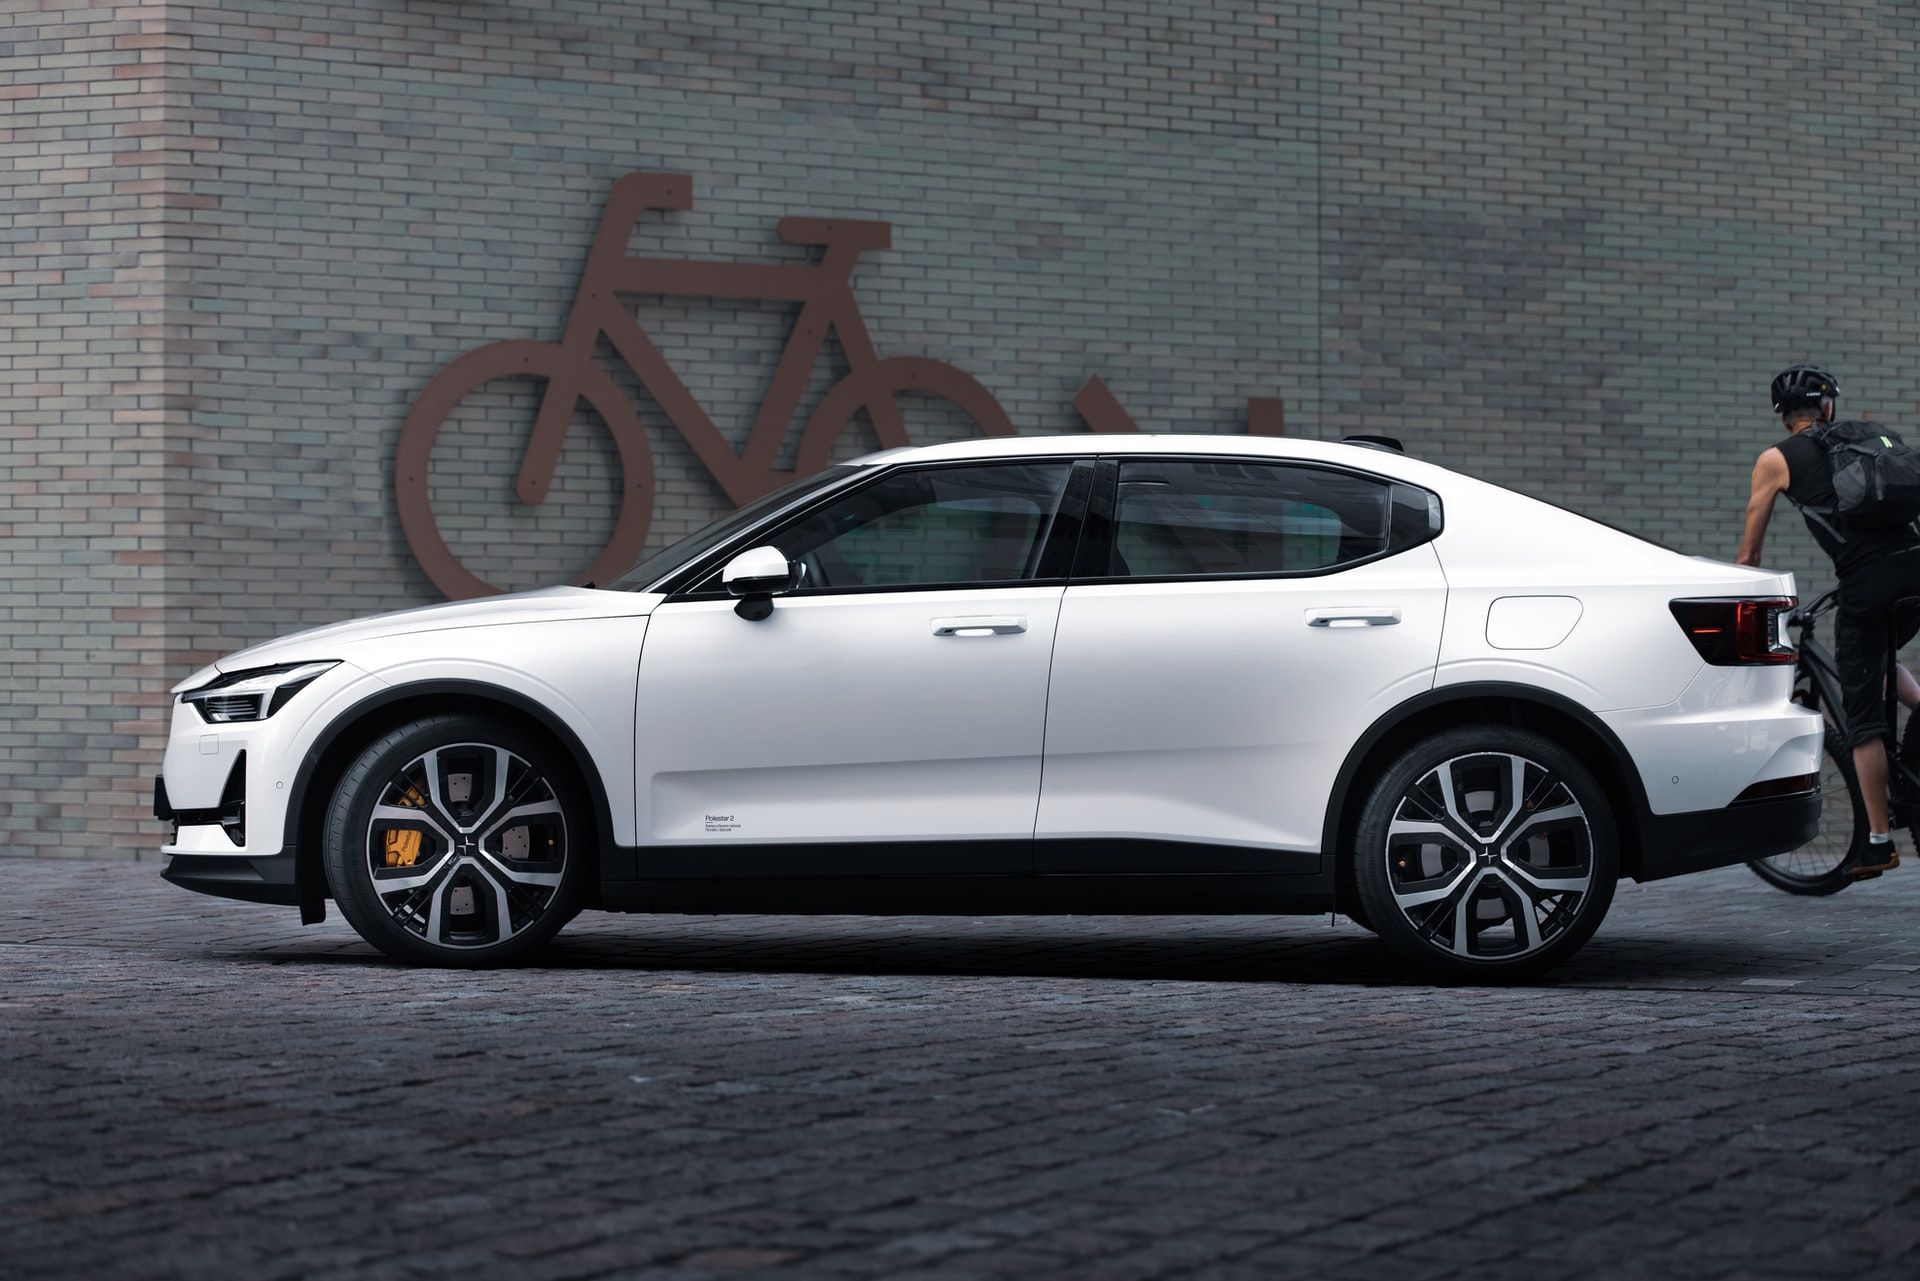 White Polestar 2 fully electric vehicle on the street against brick wall